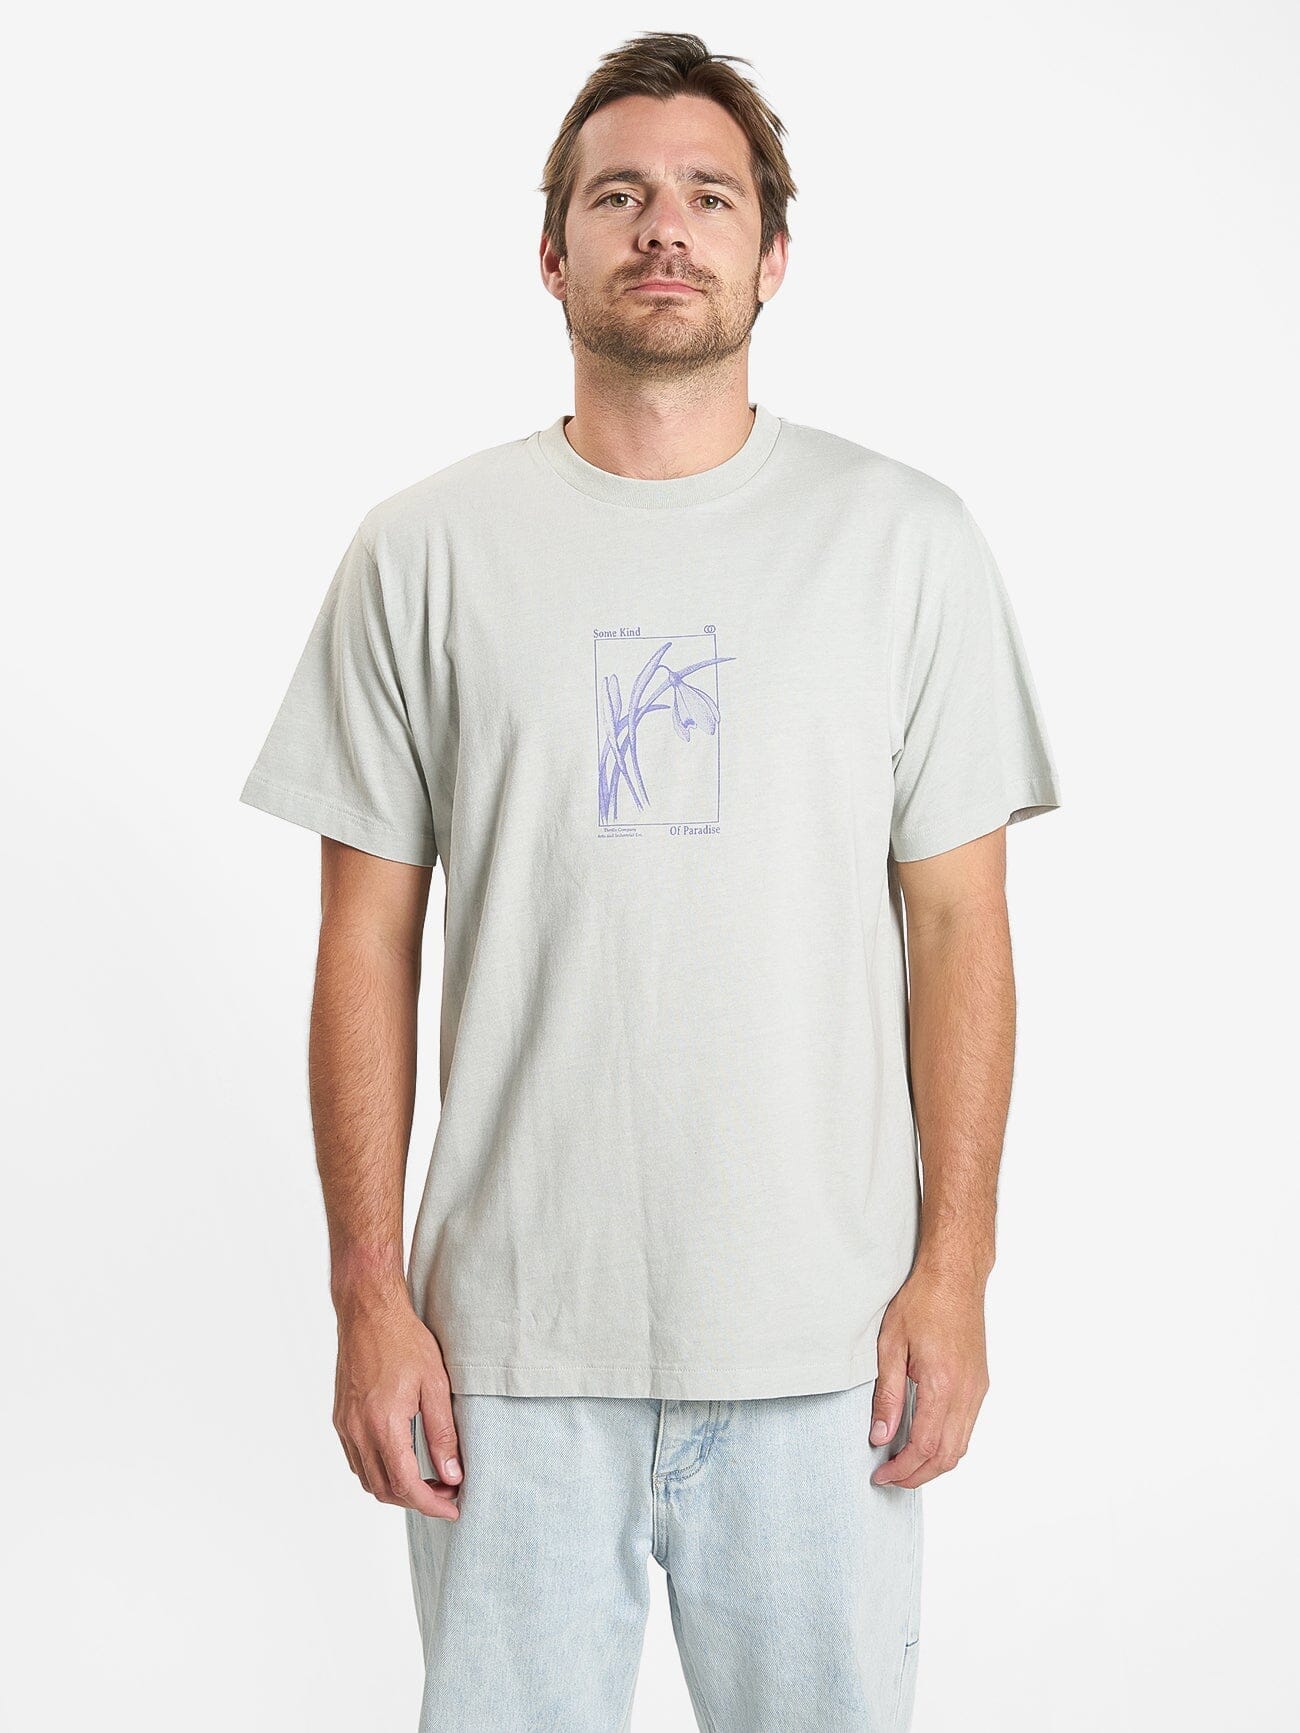 Guided By Voices Merch Fit Tee - Sage Grey